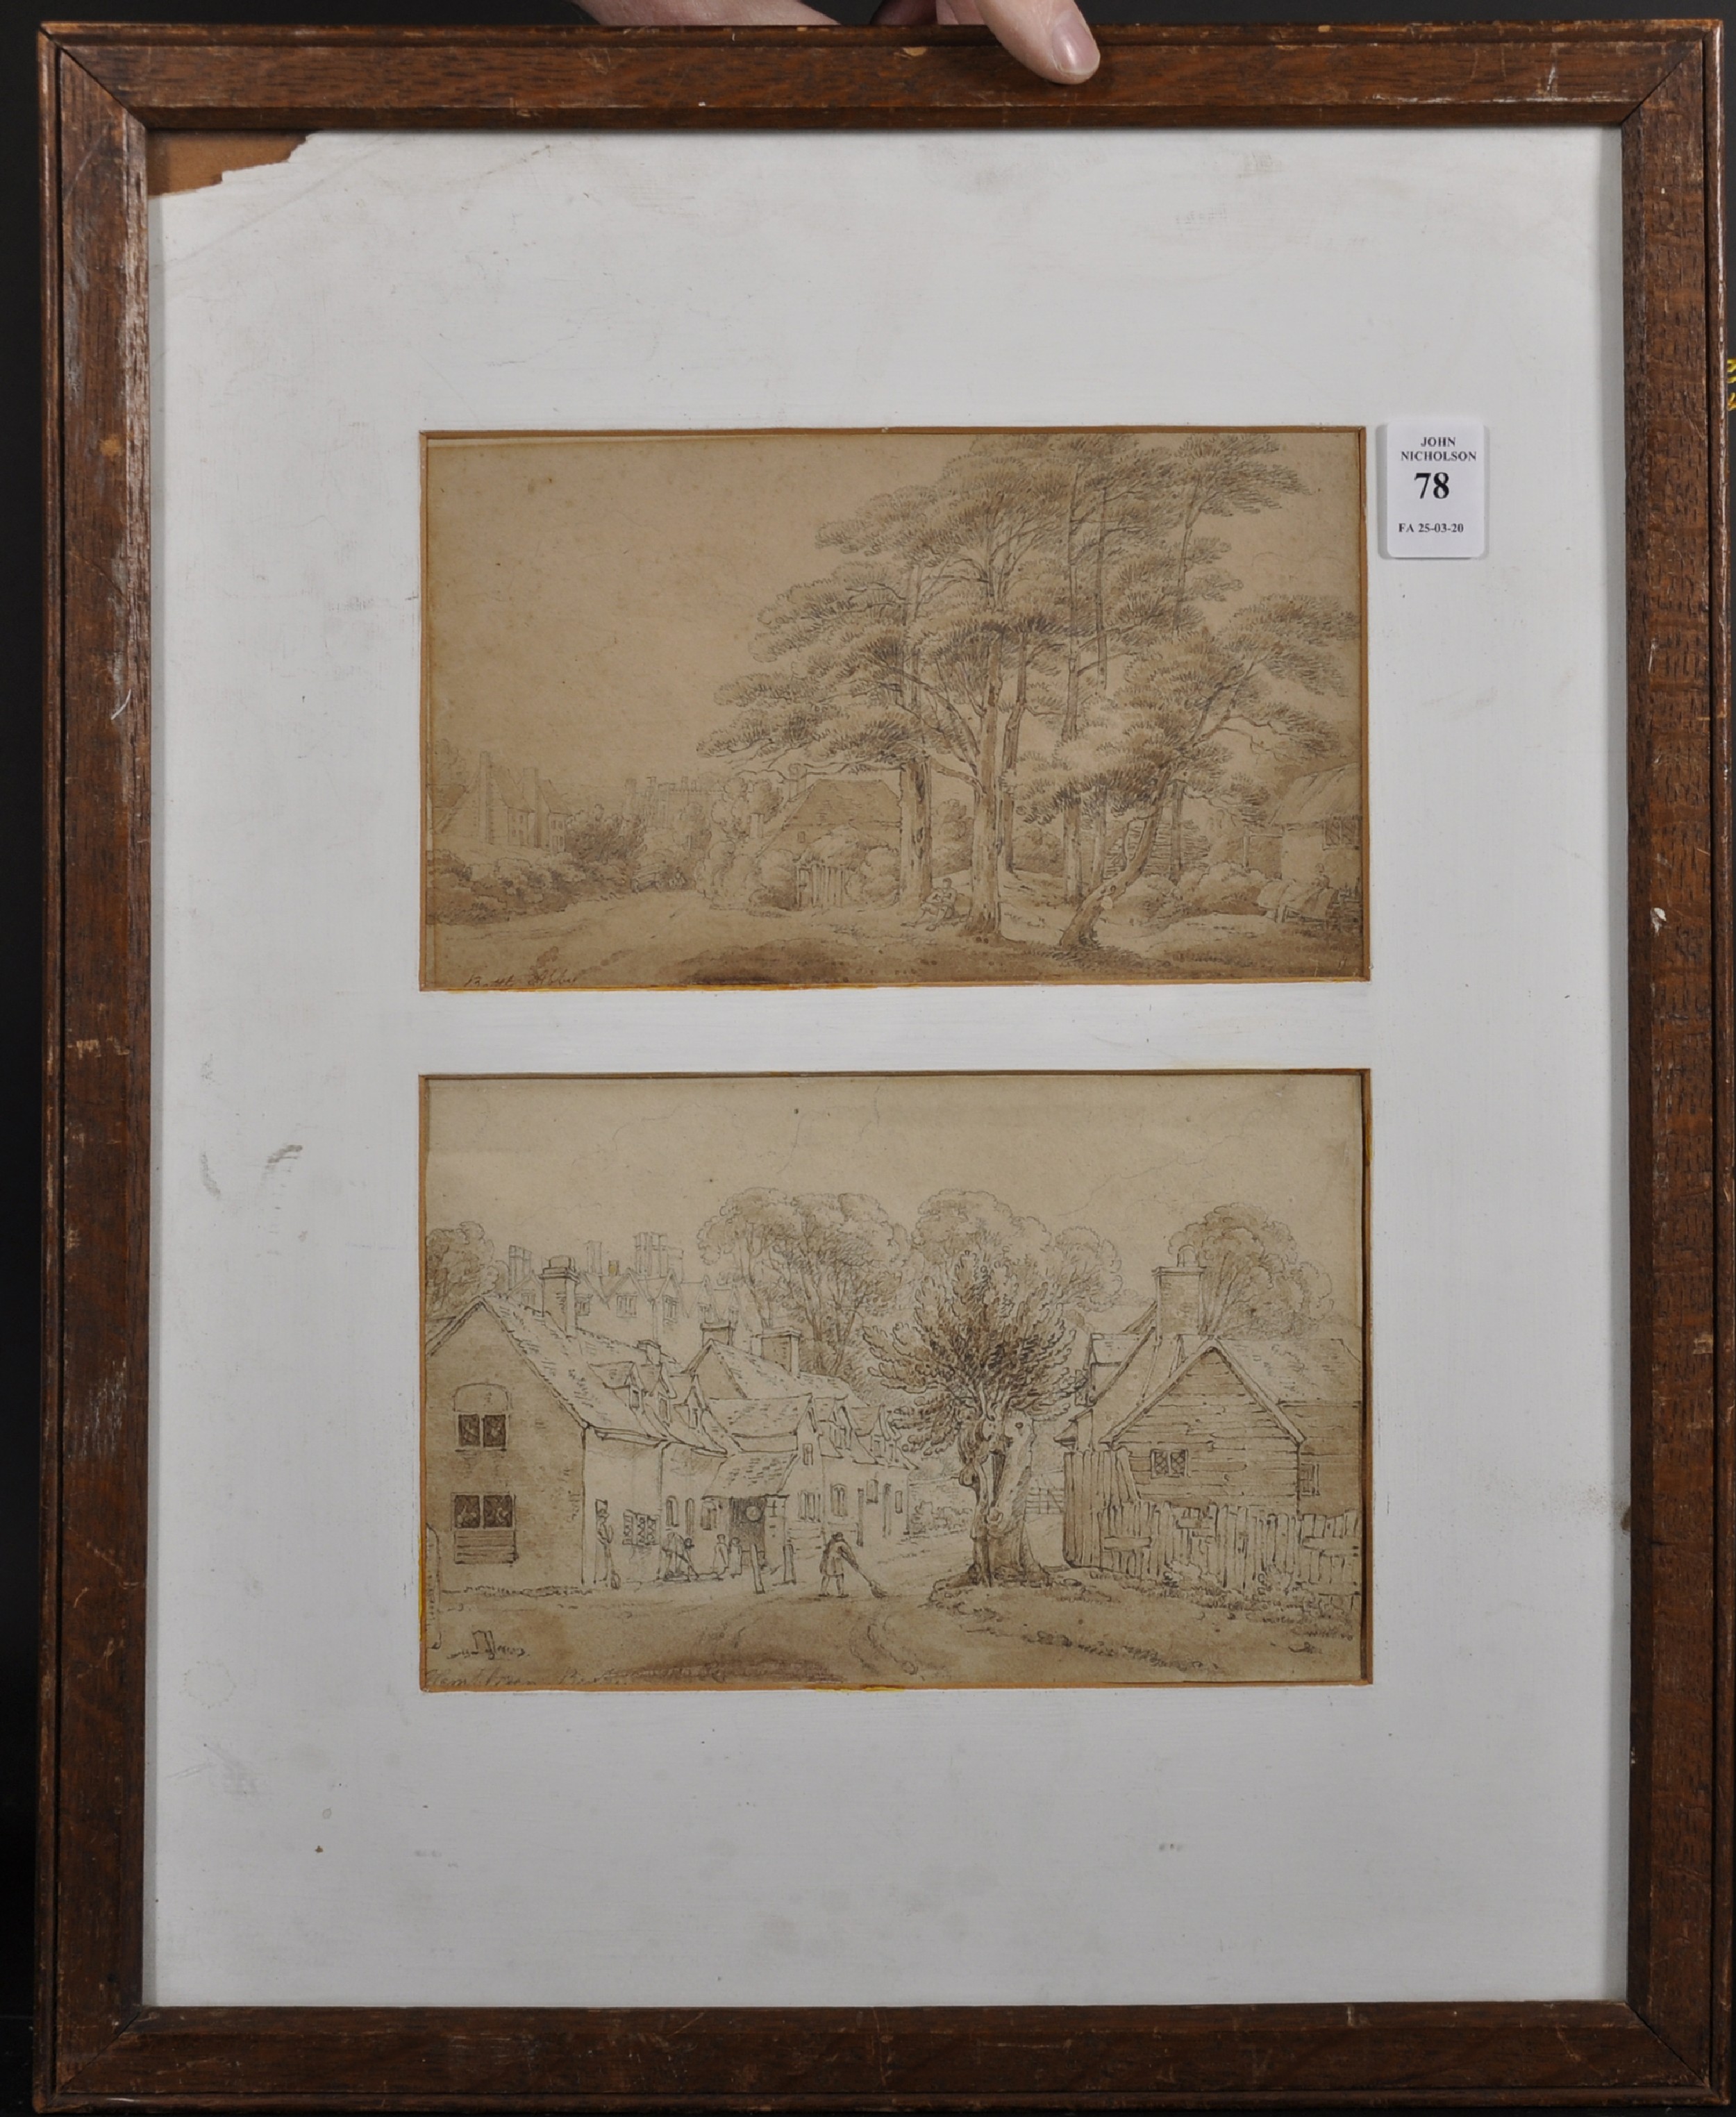 18th Century English School. "Battle Abbey", with a Figure in the foreground, Pencil and Wash, - Image 6 of 7